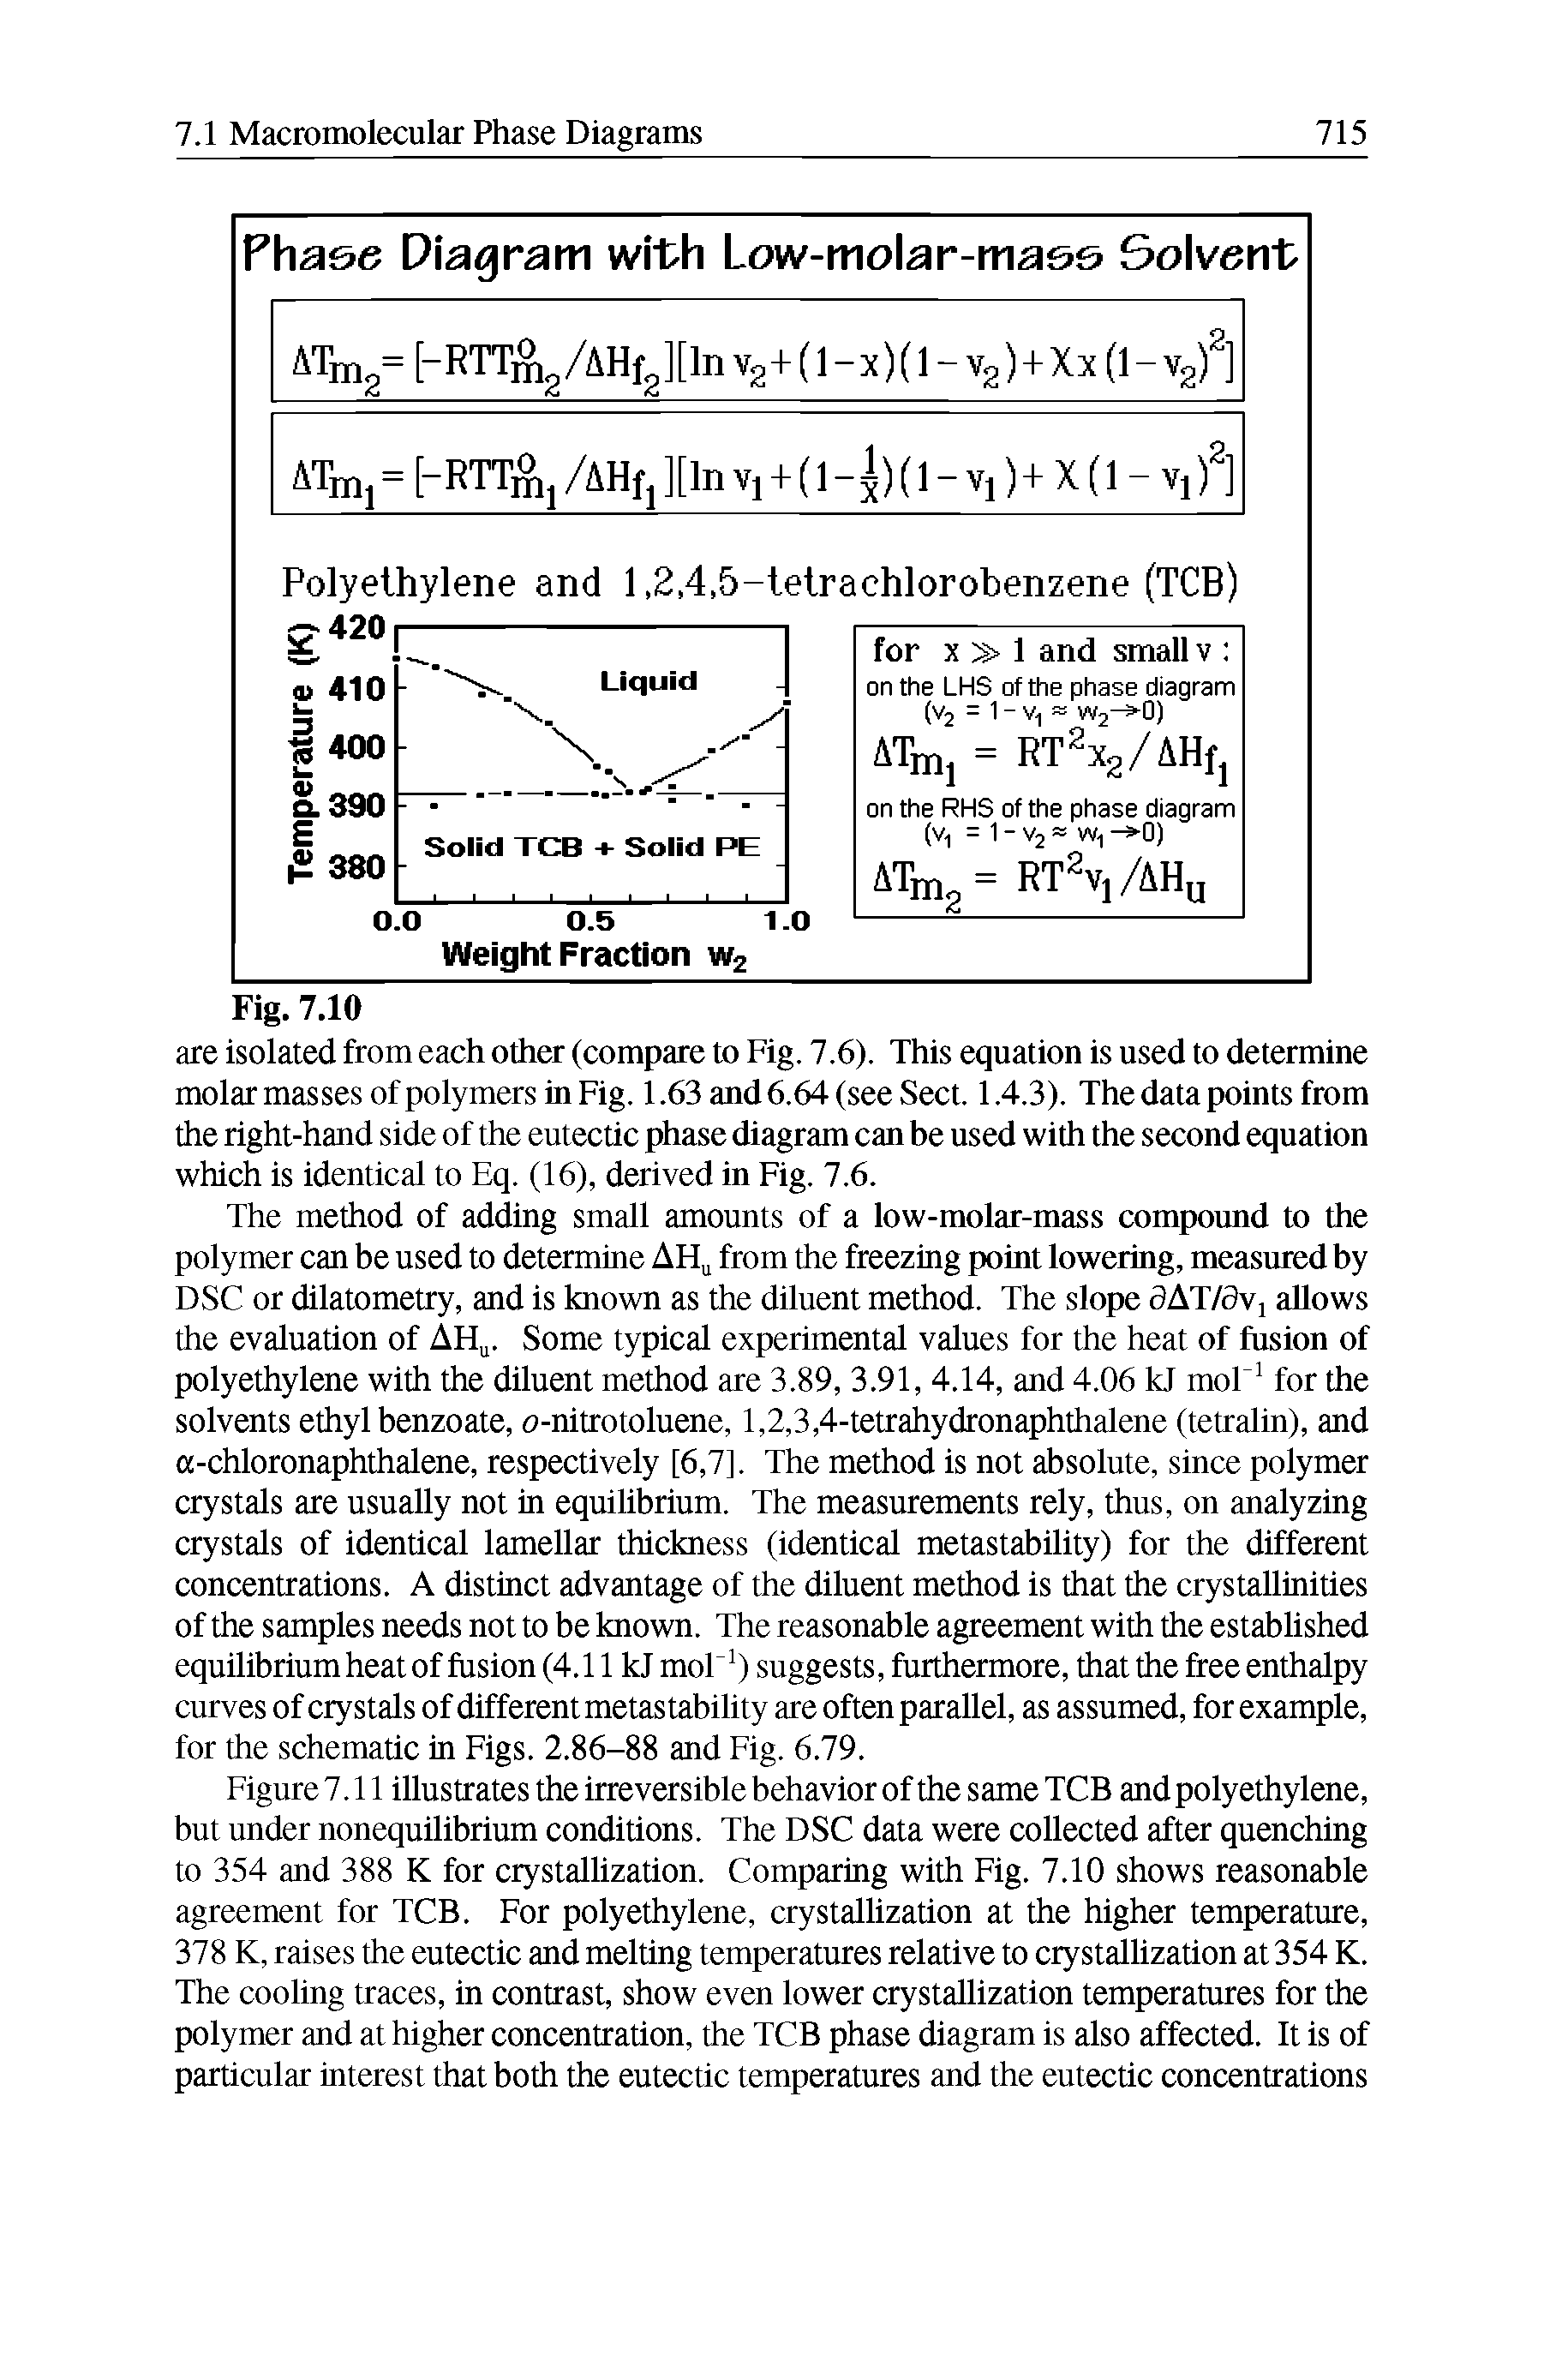 Figure7.11 illustrates the irreversible behavior ofthe same TCB and polyethylene, but under nonequilibrium conditions. The DSC data were collected after quenching to 354 and 388 K for crystallization. Comparing with Fig. 7.10 shows reasonable agreement for TCB. For polyethylene, crystallization at the higher temperature, 378 K, raises the eutectic and melting temperatures relative to crystalUzation at 354 K. The coohng traces, in contrast, show even lower crystallization temperatures for the polymer and at higher concentration, the TCB phase diagram is also affected. It is of particular interest that both the eutectic temperatures and the eutectic concentrations...